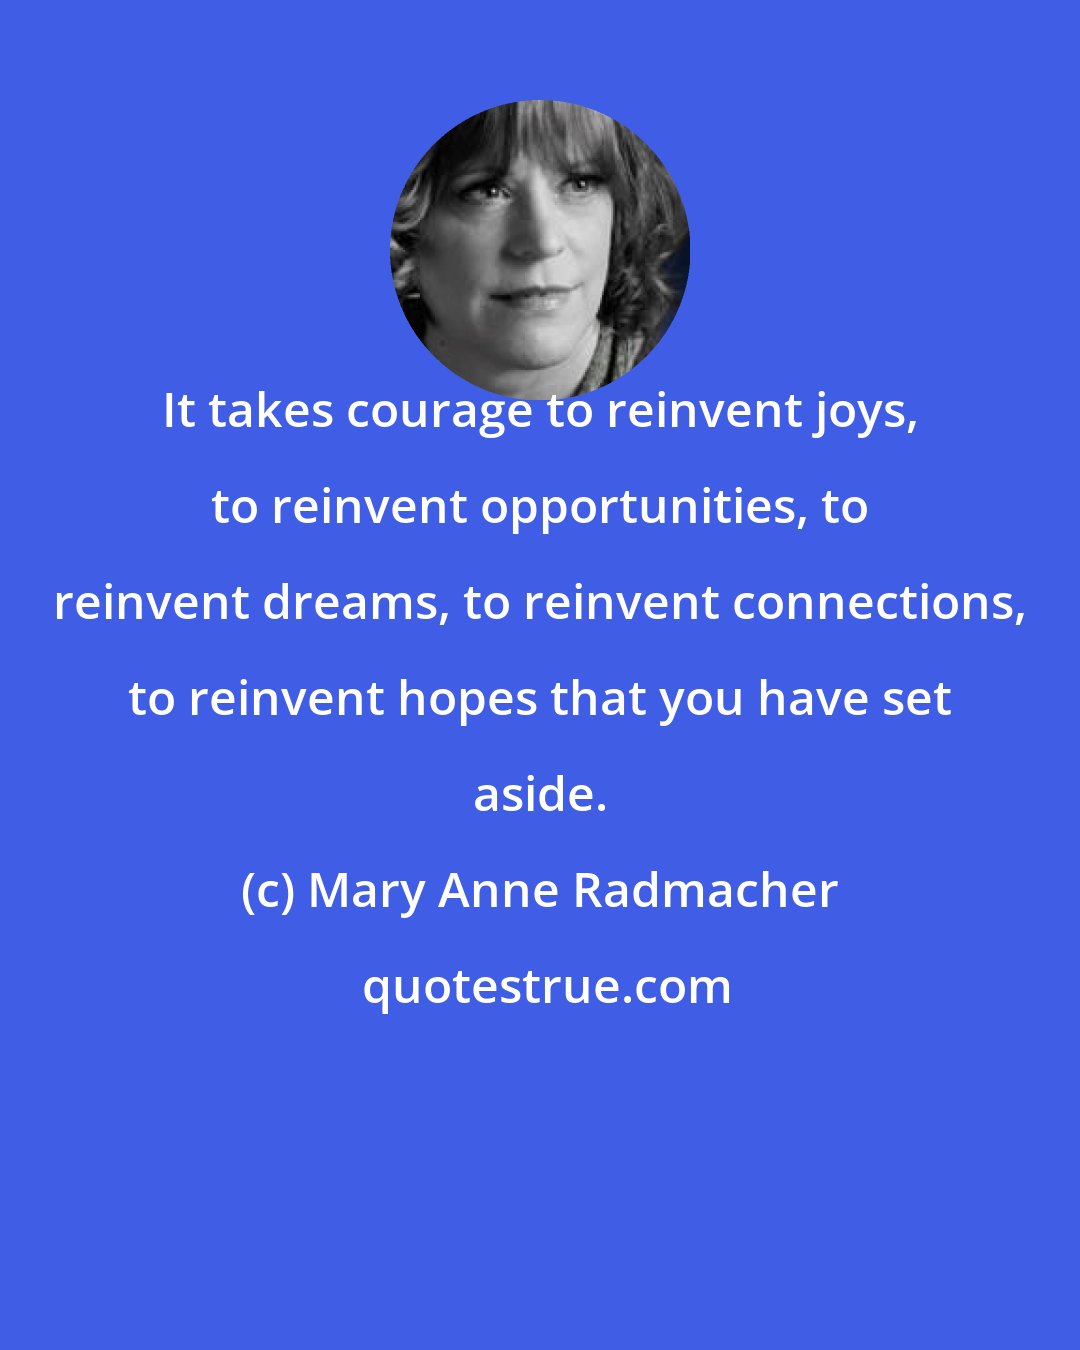 Mary Anne Radmacher: It takes courage to reinvent joys, to reinvent opportunities, to reinvent dreams, to reinvent connections, to reinvent hopes that you have set aside.